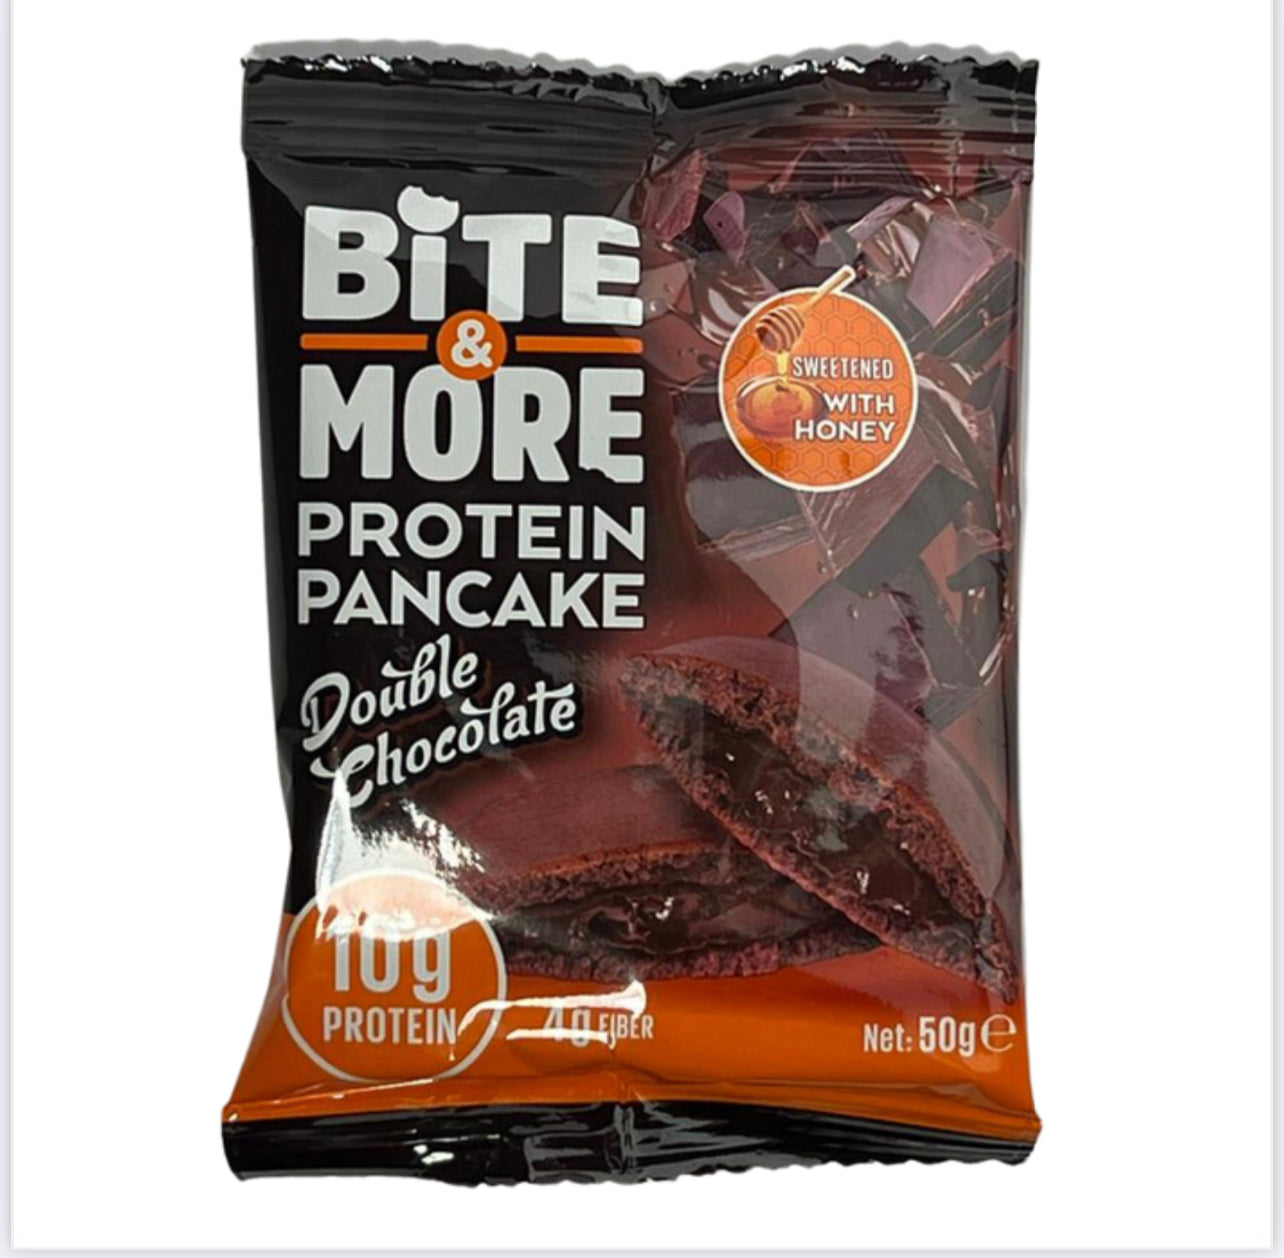 Bite and More Protein Pancake